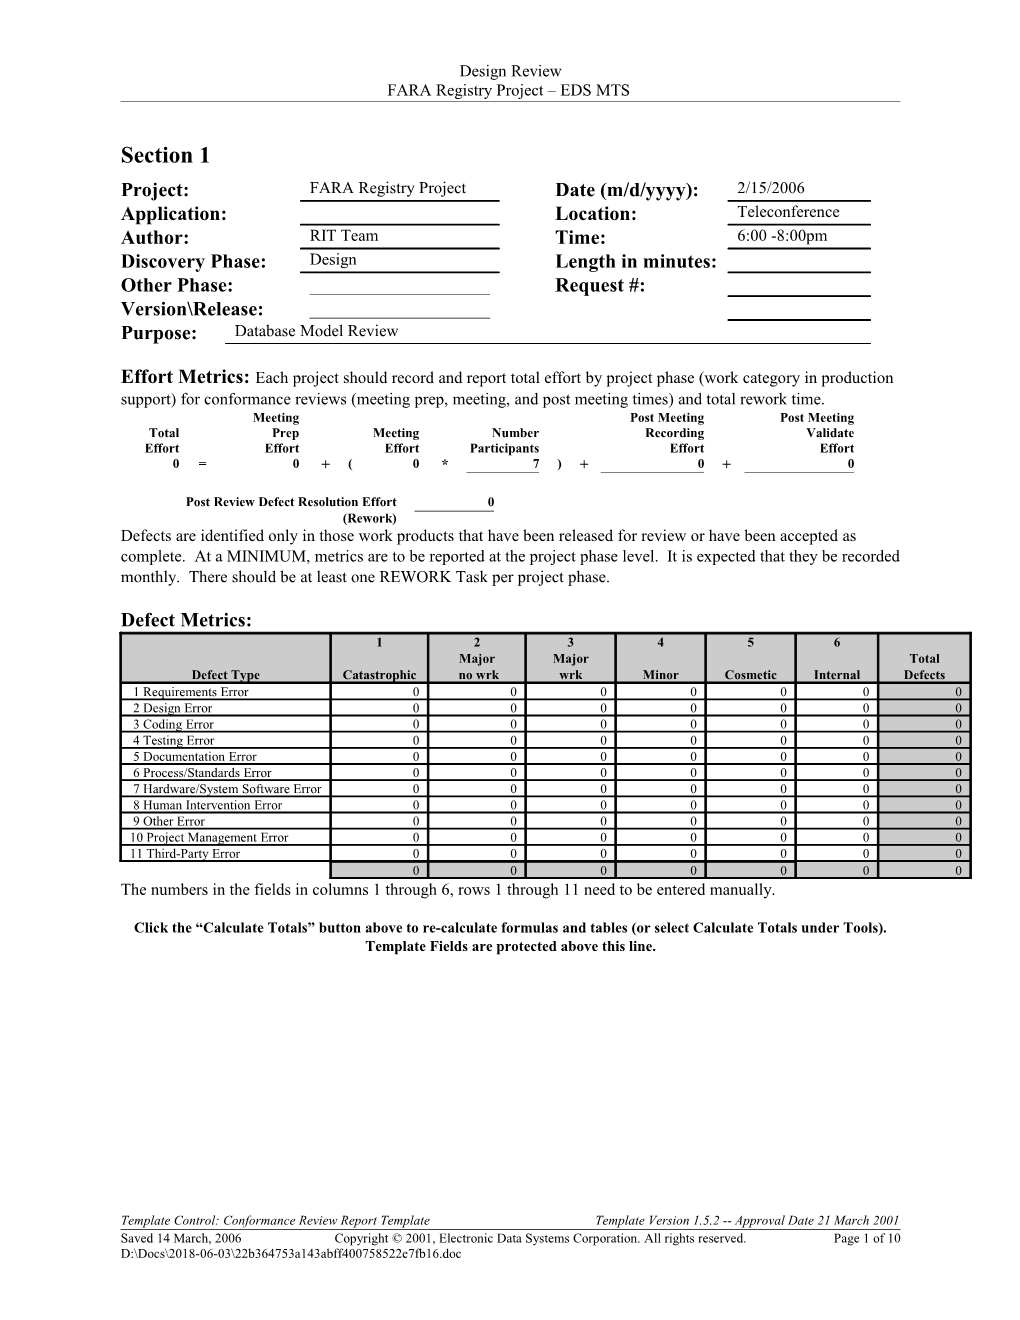 Conformance Review Report Template